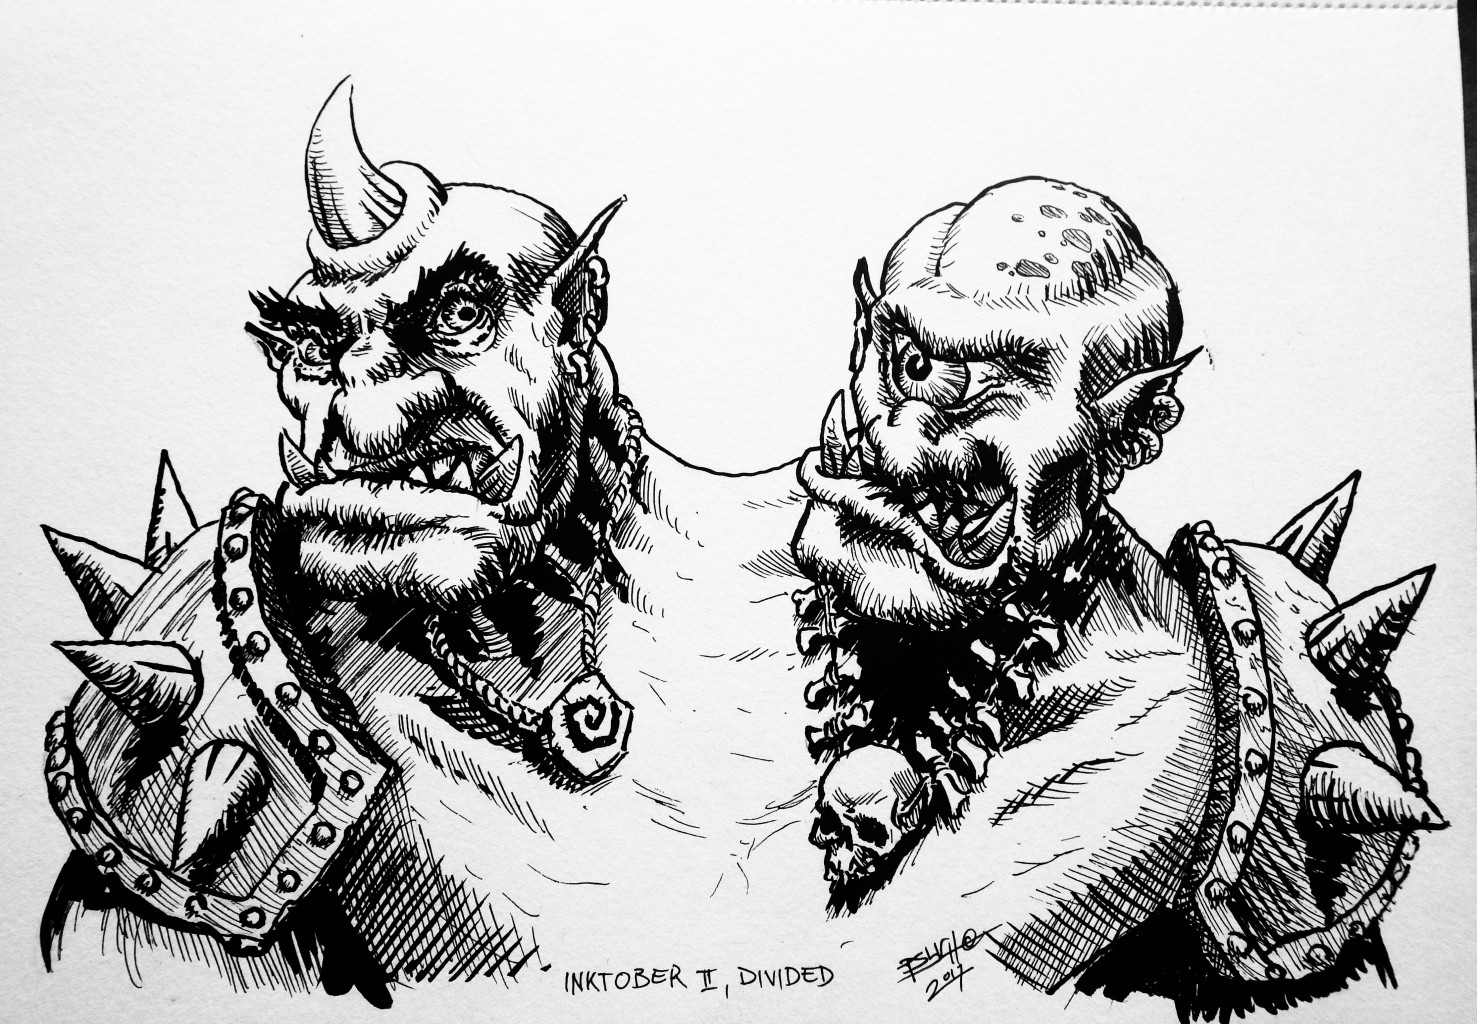 Ogre's heads are DIVIDED on a deep philosophical matter.